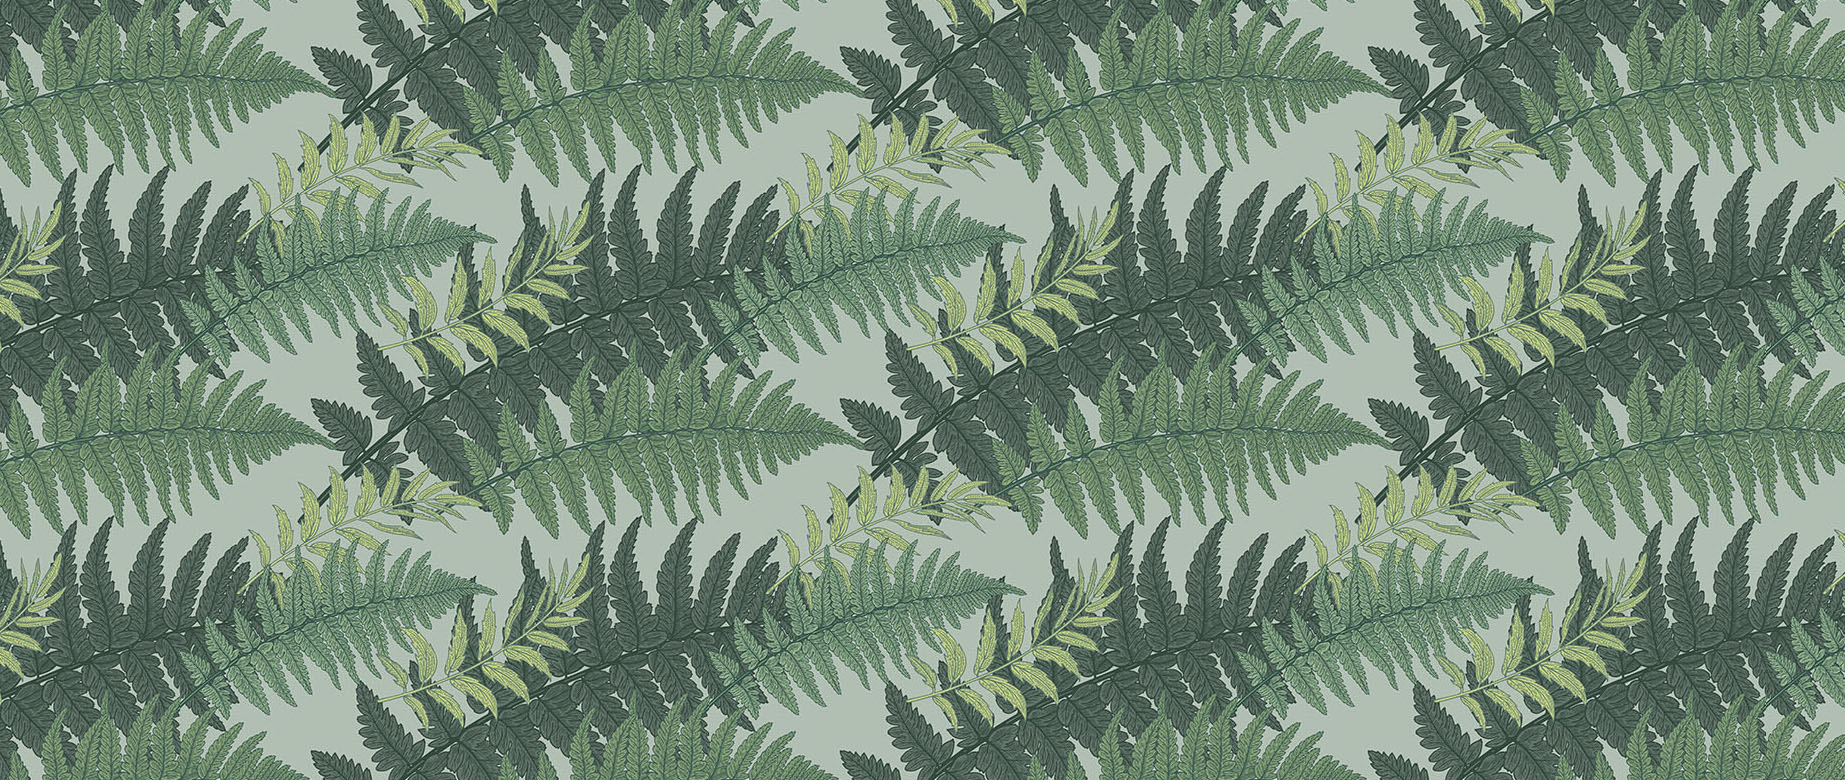 fern-leaves-wallpaper-seamless-repeat-view